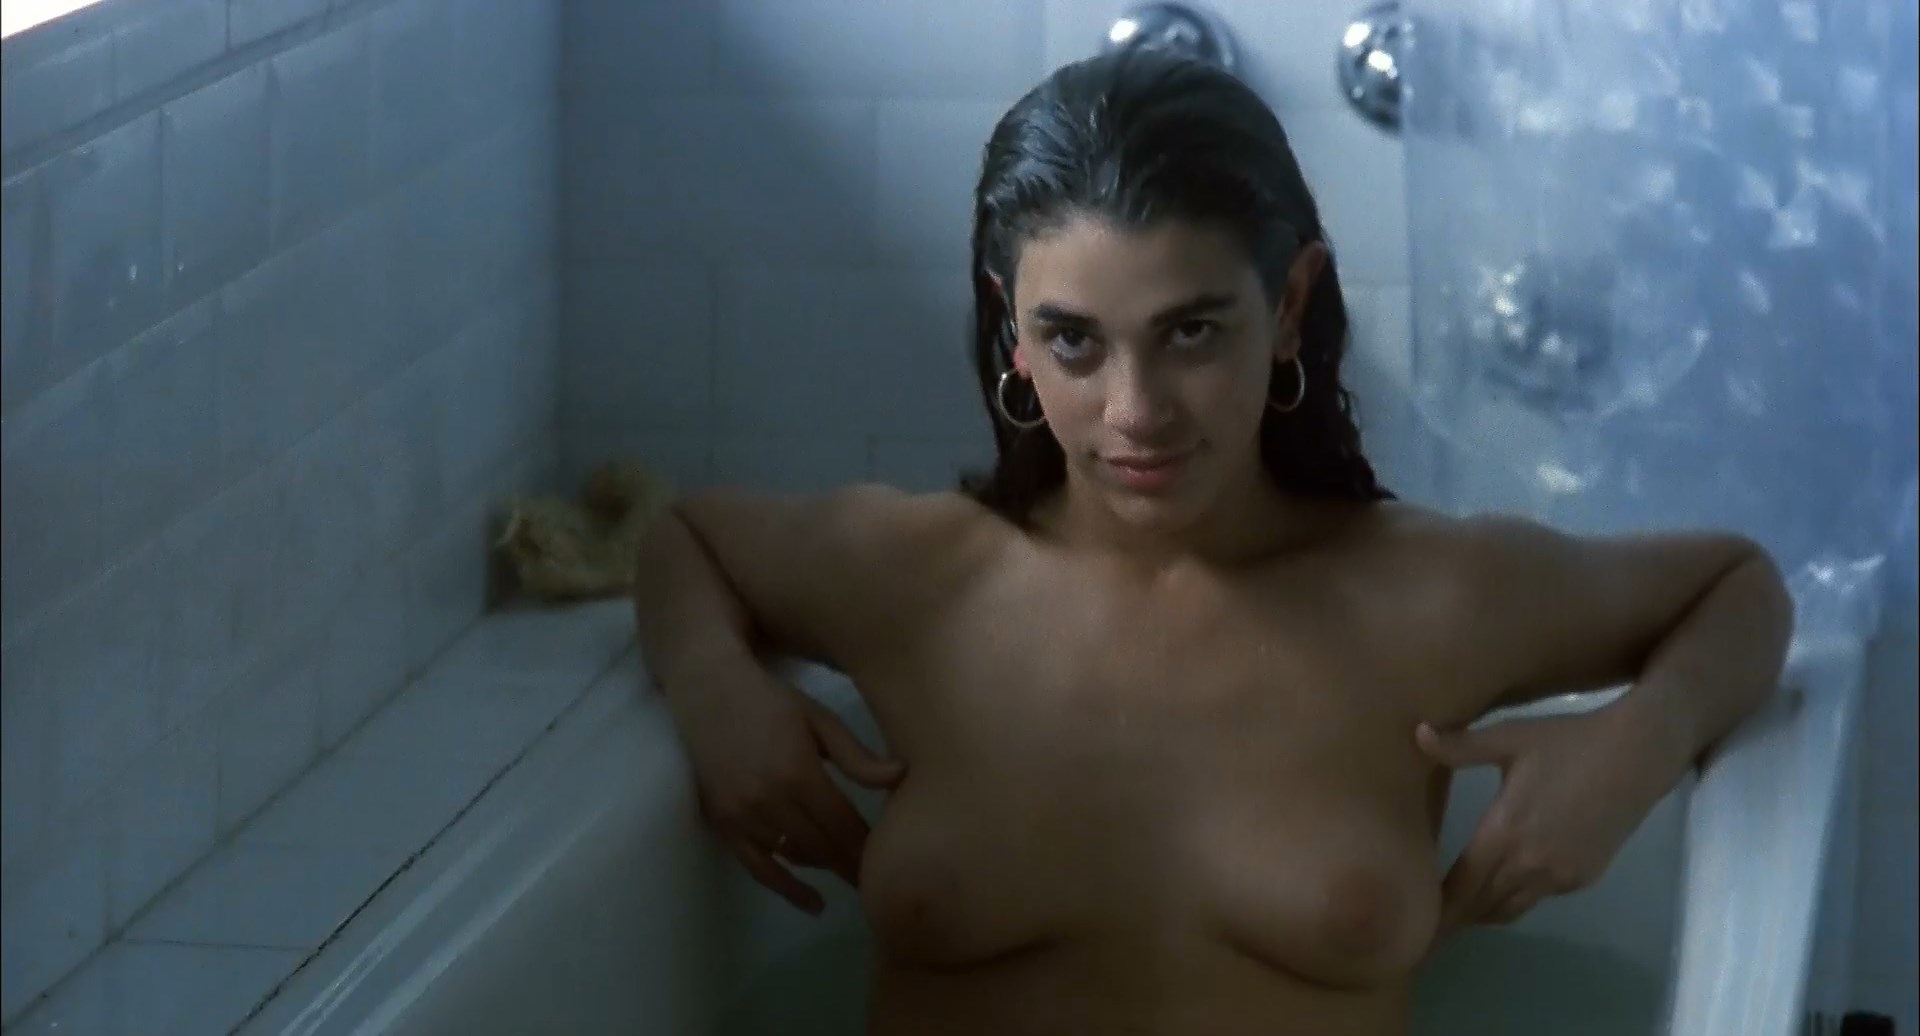 Spanish actress Ruth Gabriel in "Numbered Days" (1994) Nude Pussy...